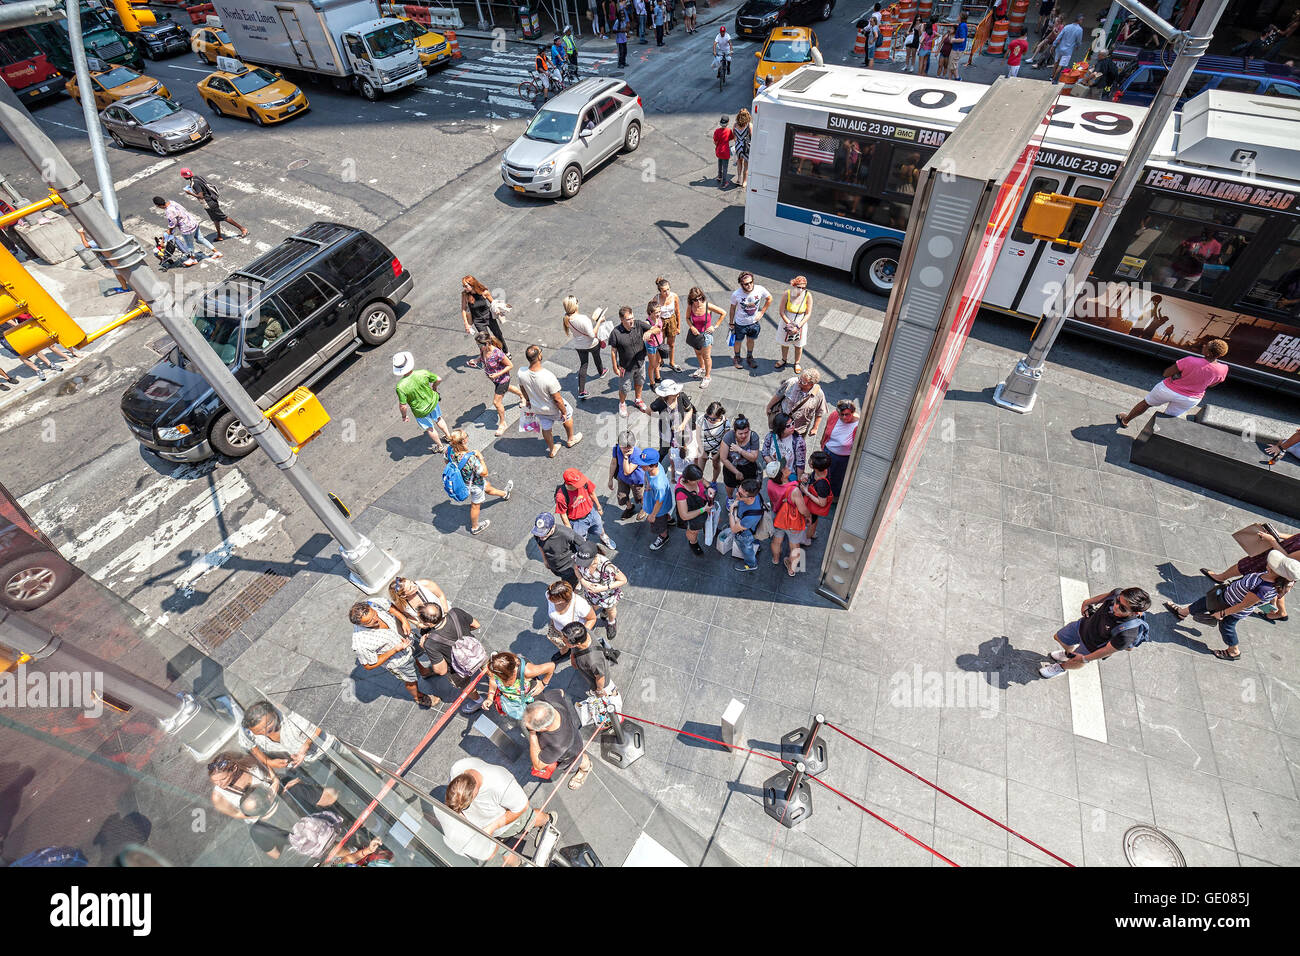 New York, USA - August 17, 2015: Wide angle picture of people on the Times Square, called by many as the heart of the world. Stock Photo